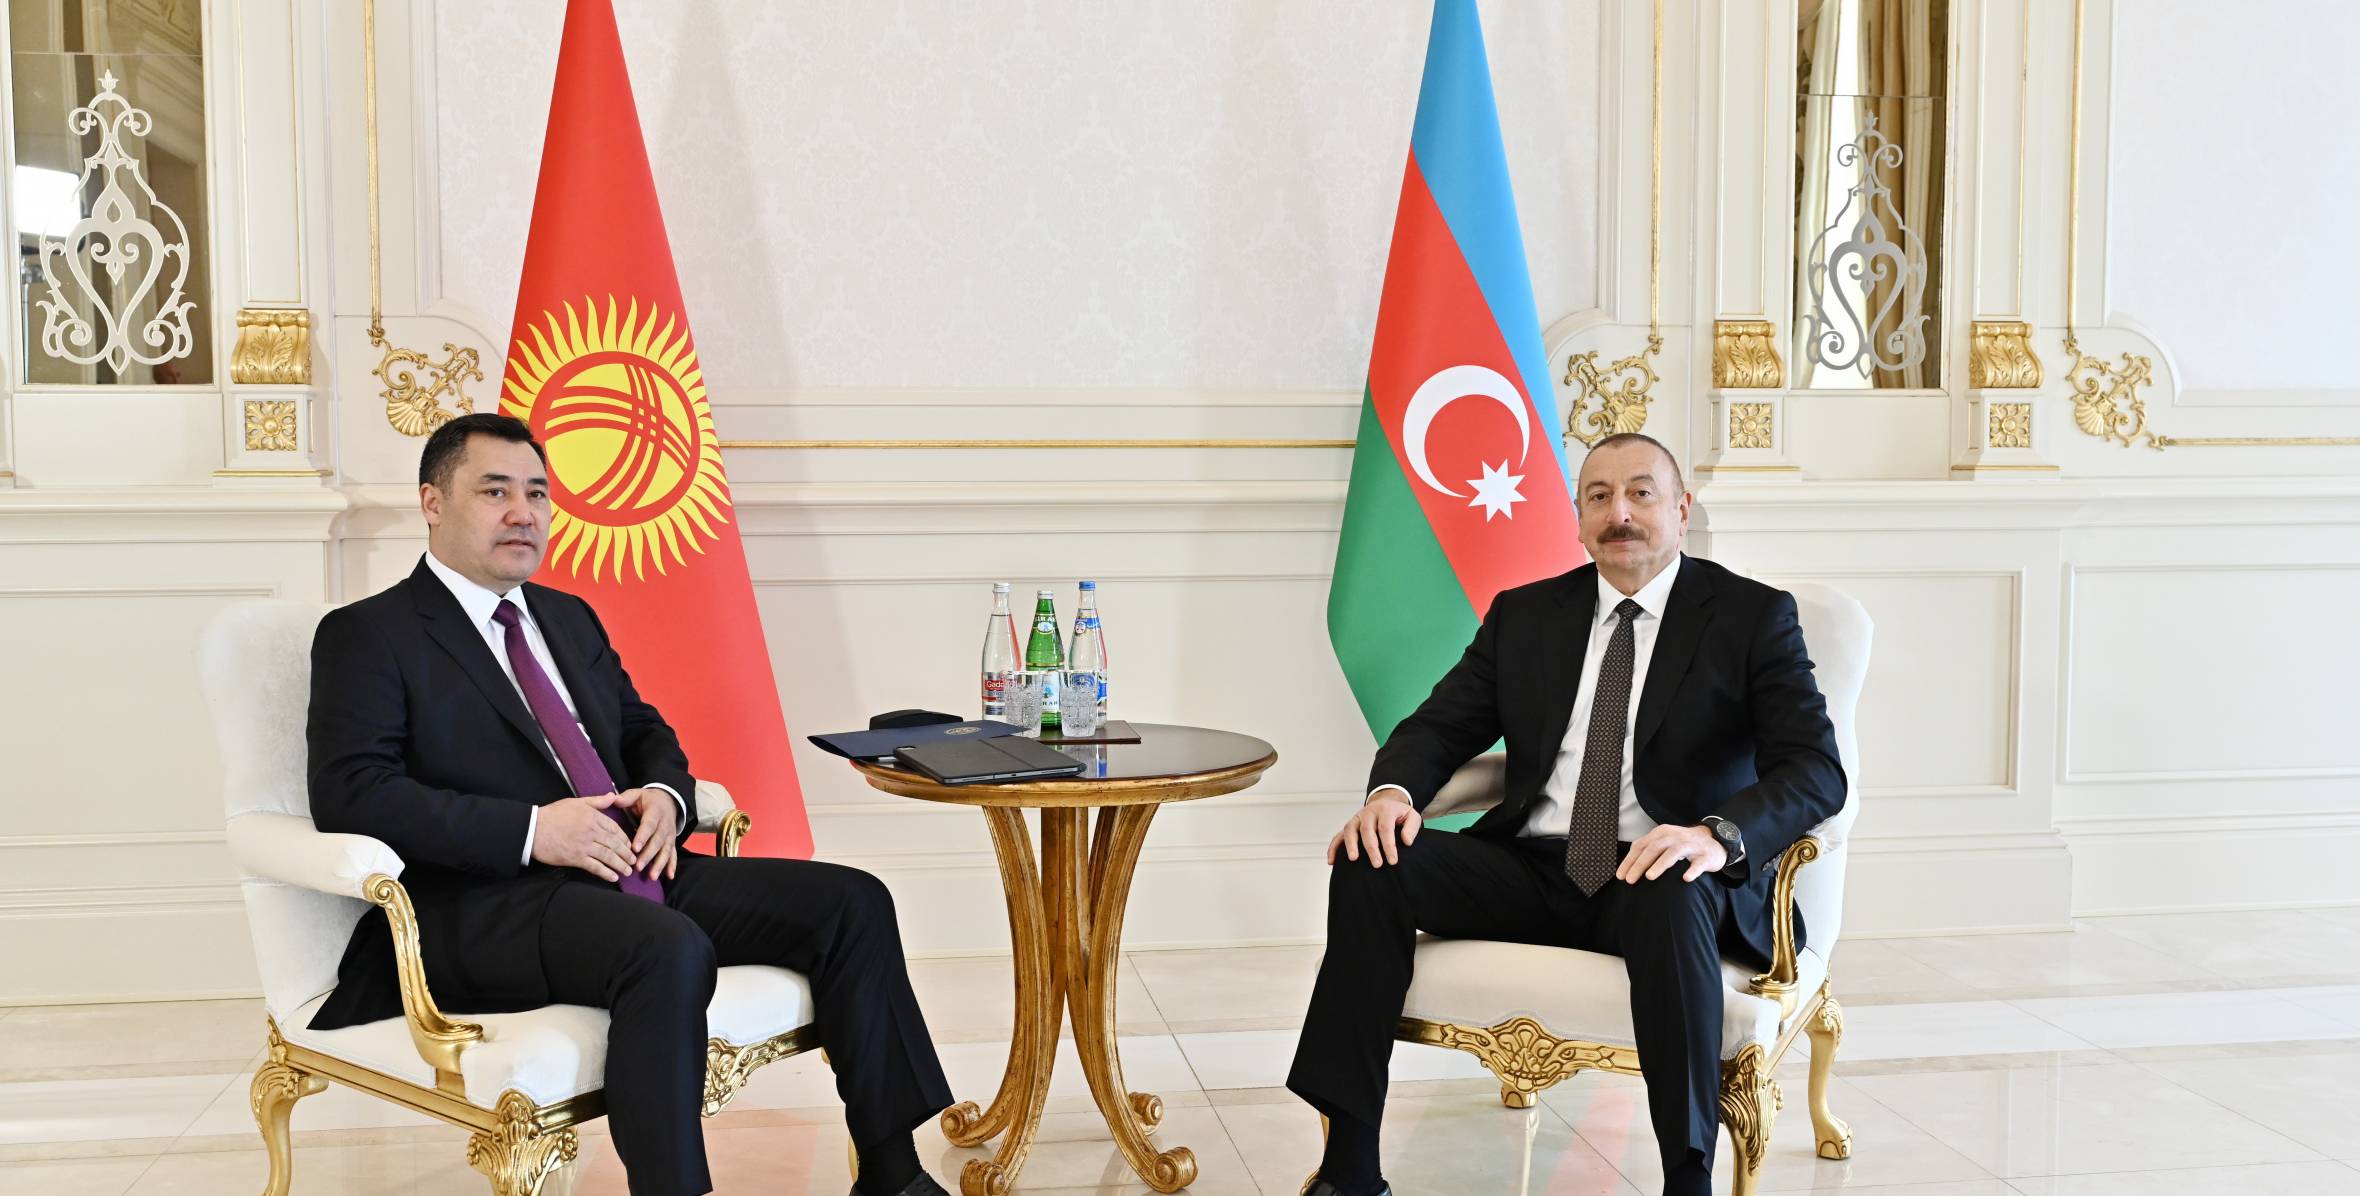 The Presidents of Azerbaijan and Kyrgyzstan held a one-on-one meeting